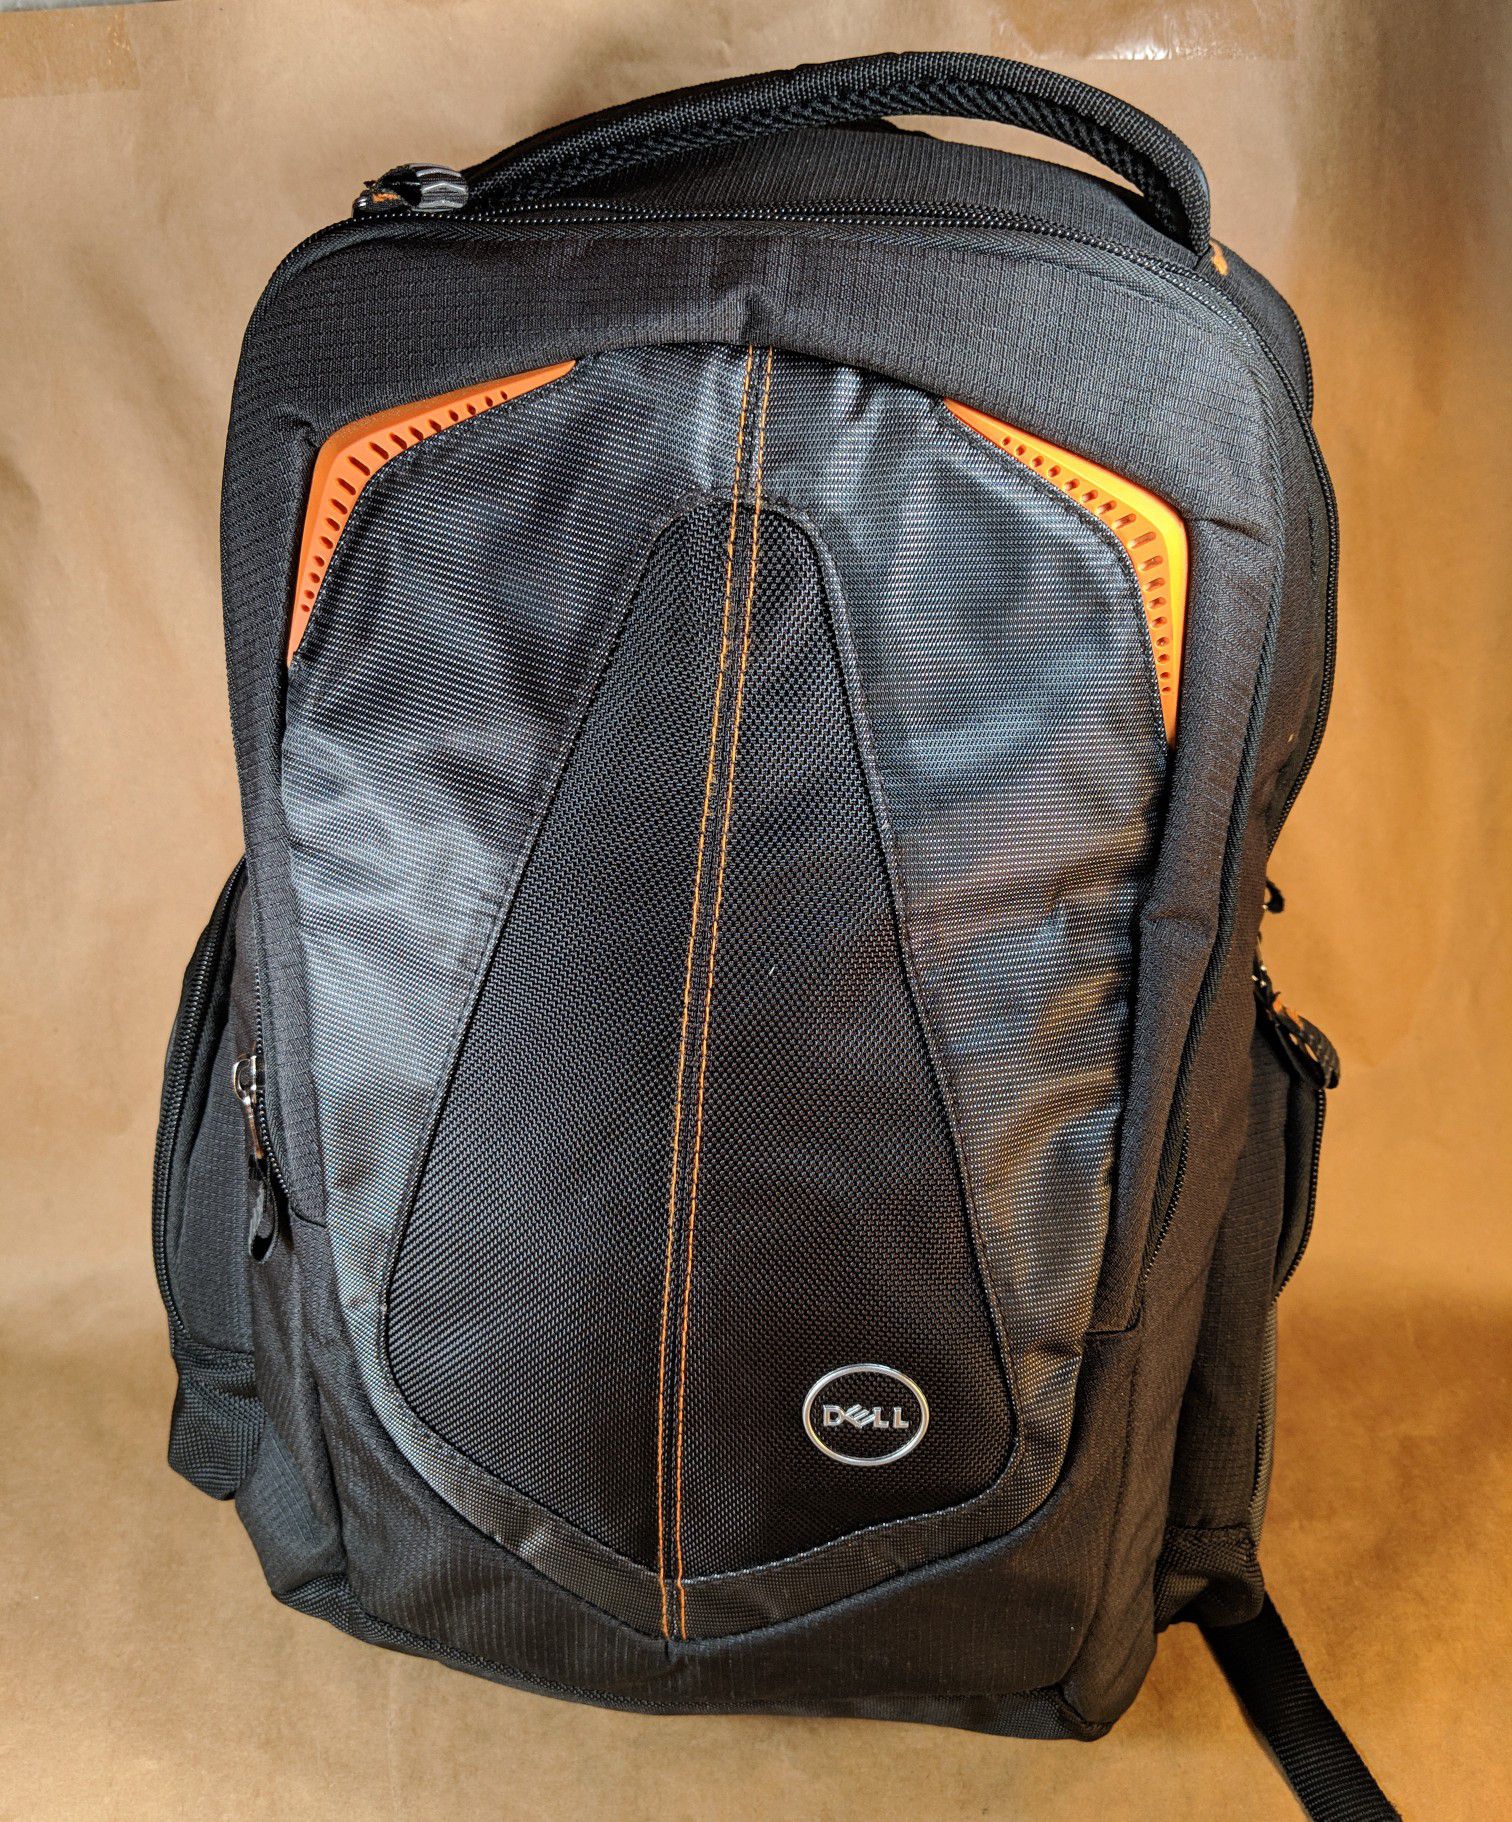 Dell Backpack Genuine RV5TV VDPX7 Black and Orange Adventure Laptop Notebook